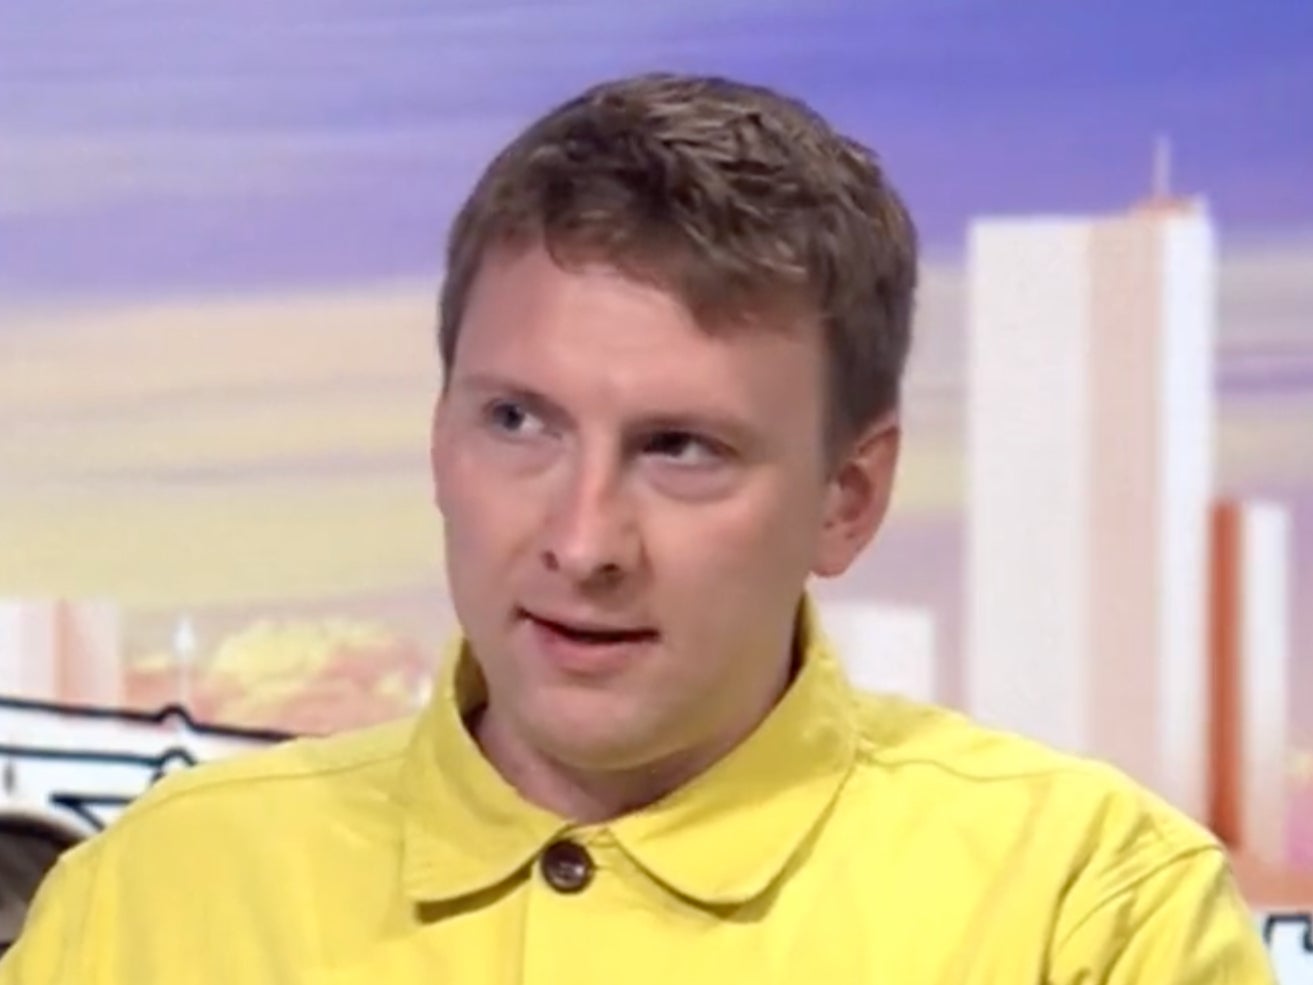 Joe Lycett joked about being a right-wing Tory supporter